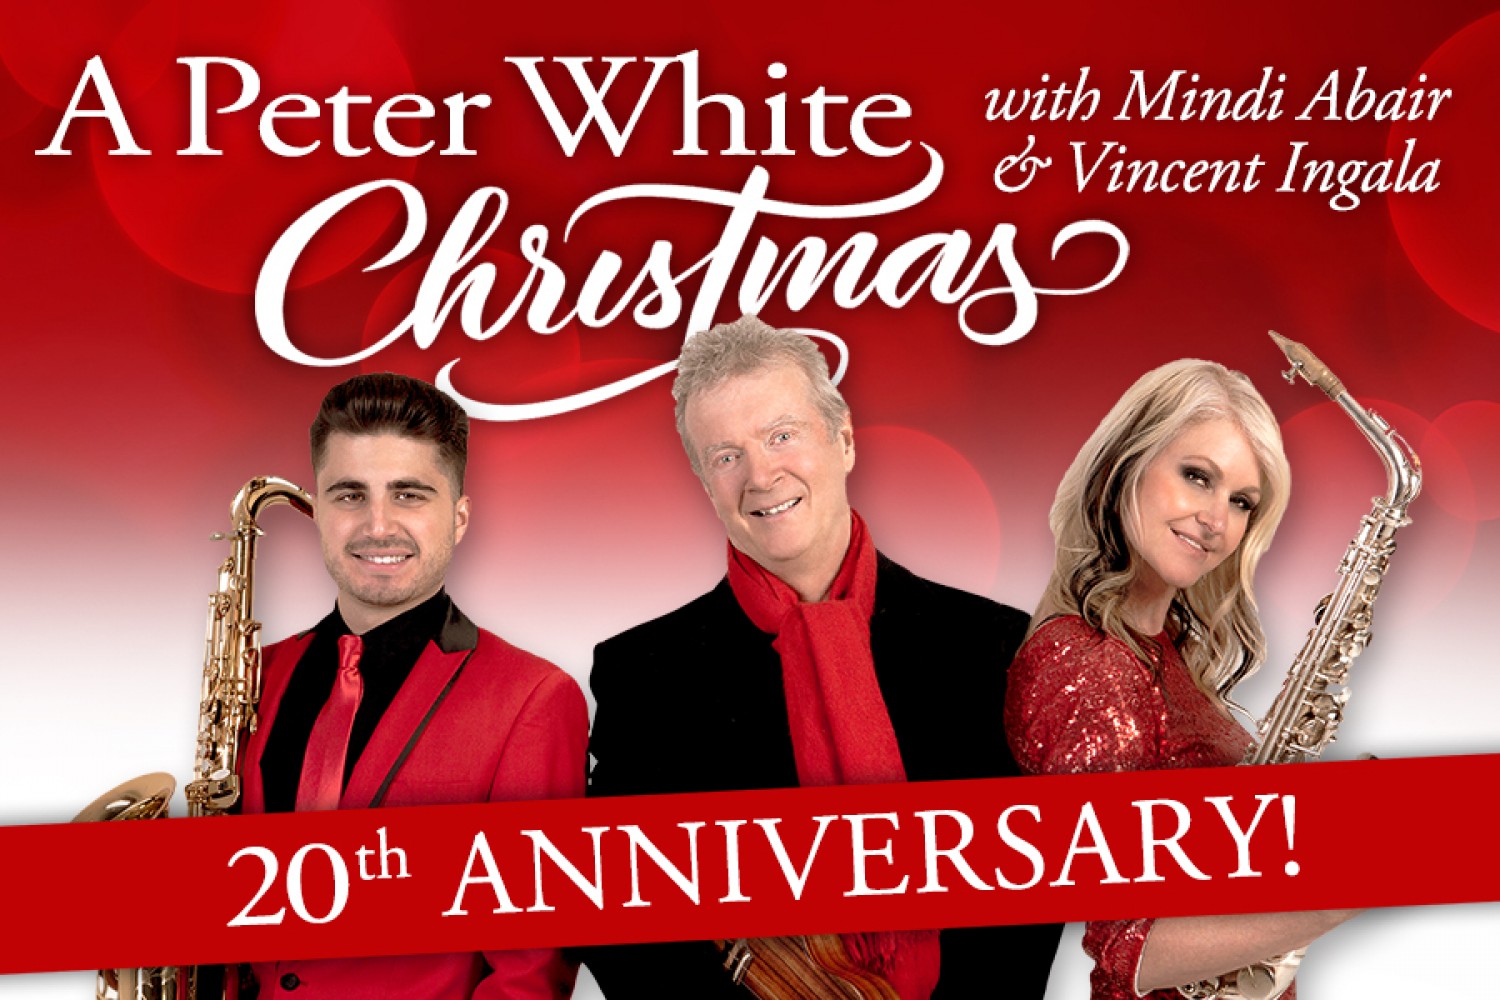 A Peter White Christmas with Mindi Abair and Vincent IngalaShow The